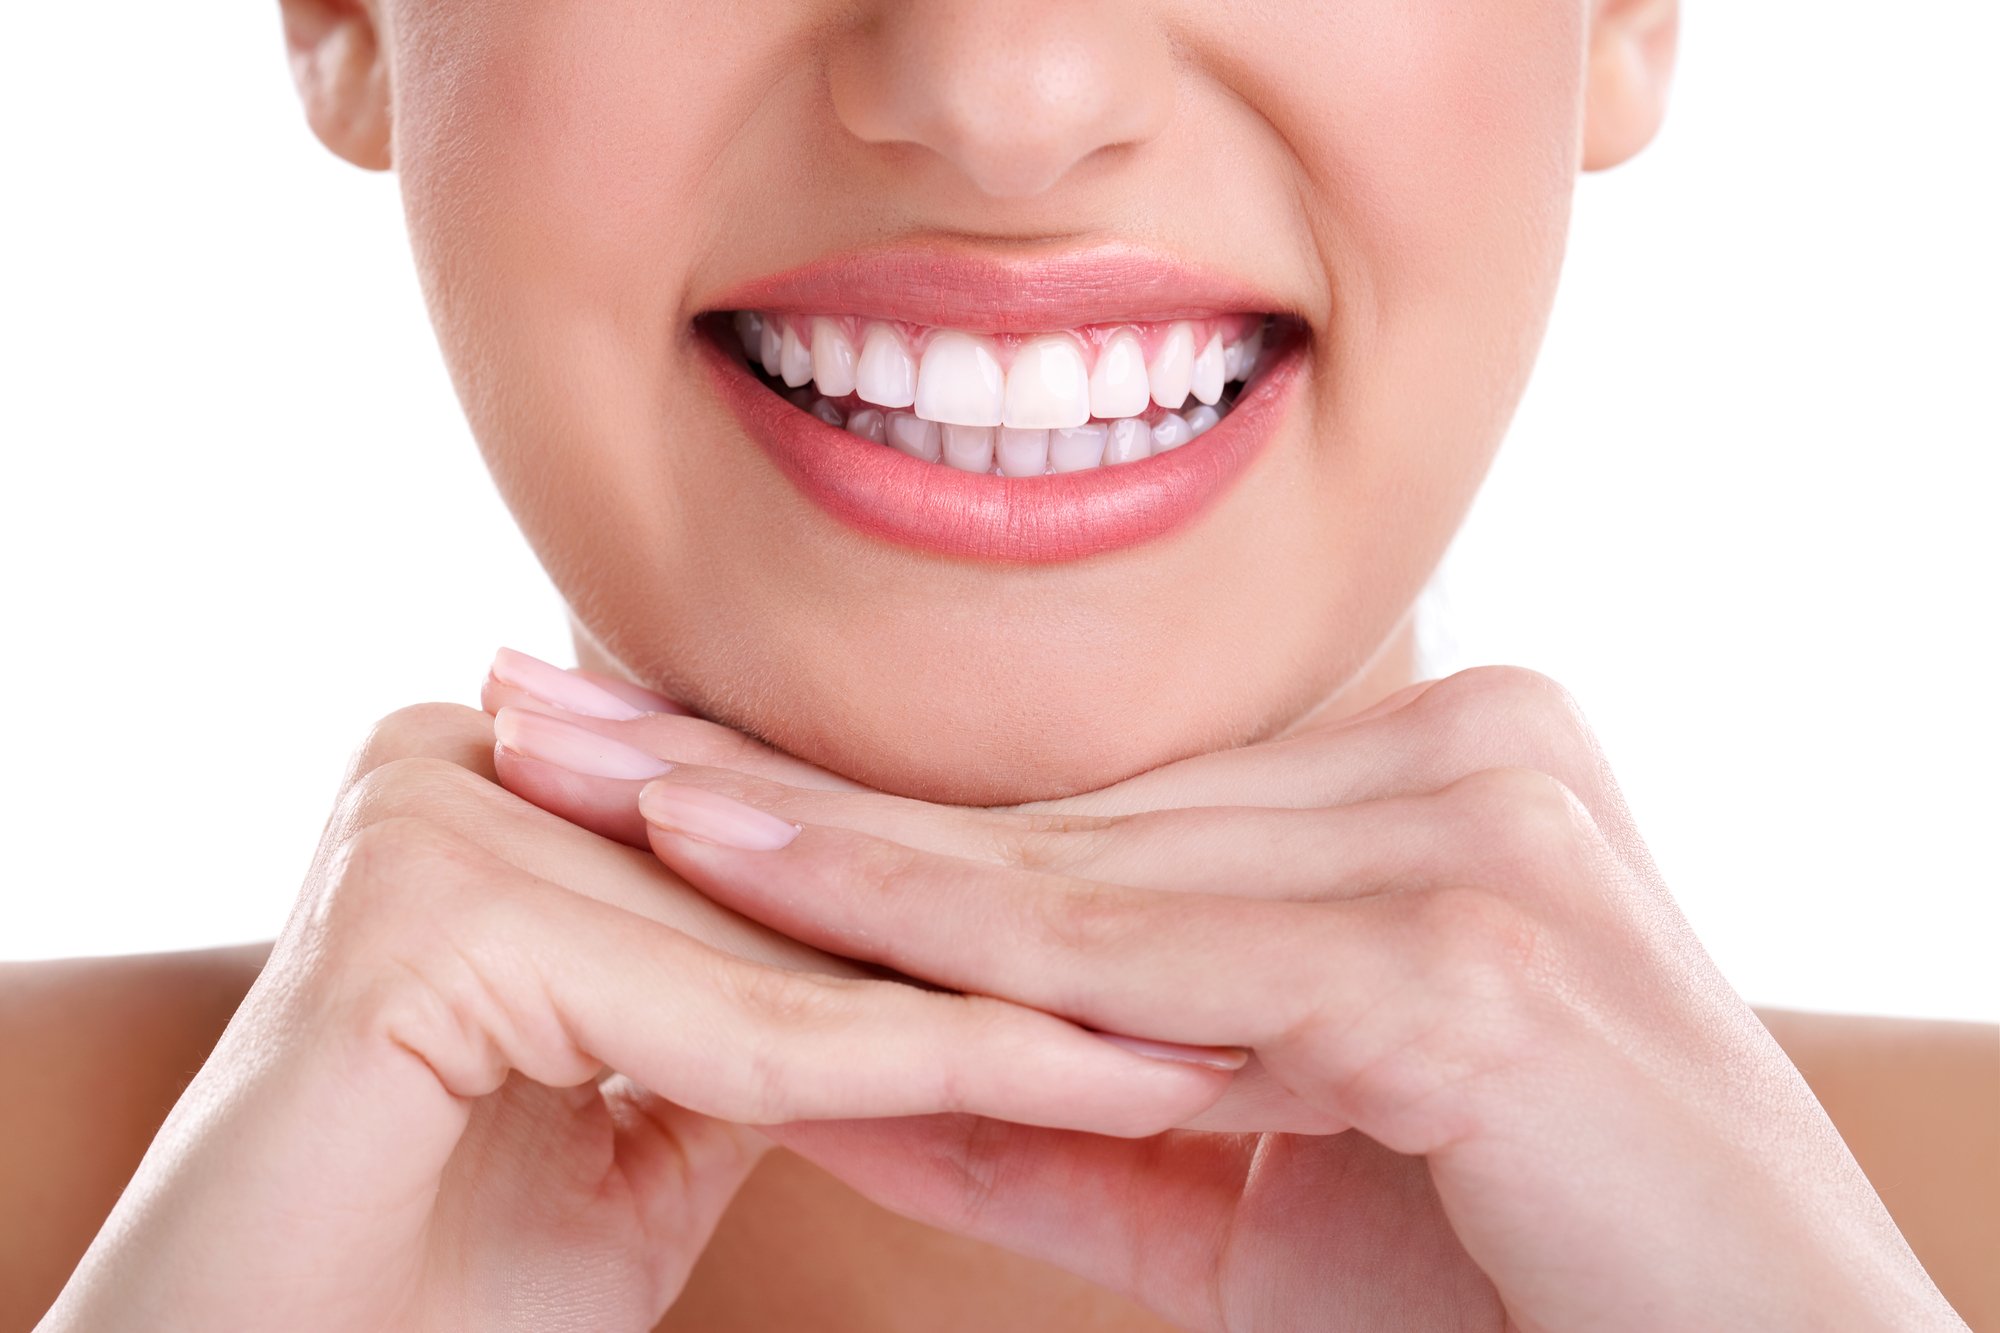 A person rests their chin on their hands and smiles widely to reveal the benefits of routine oral hygiene